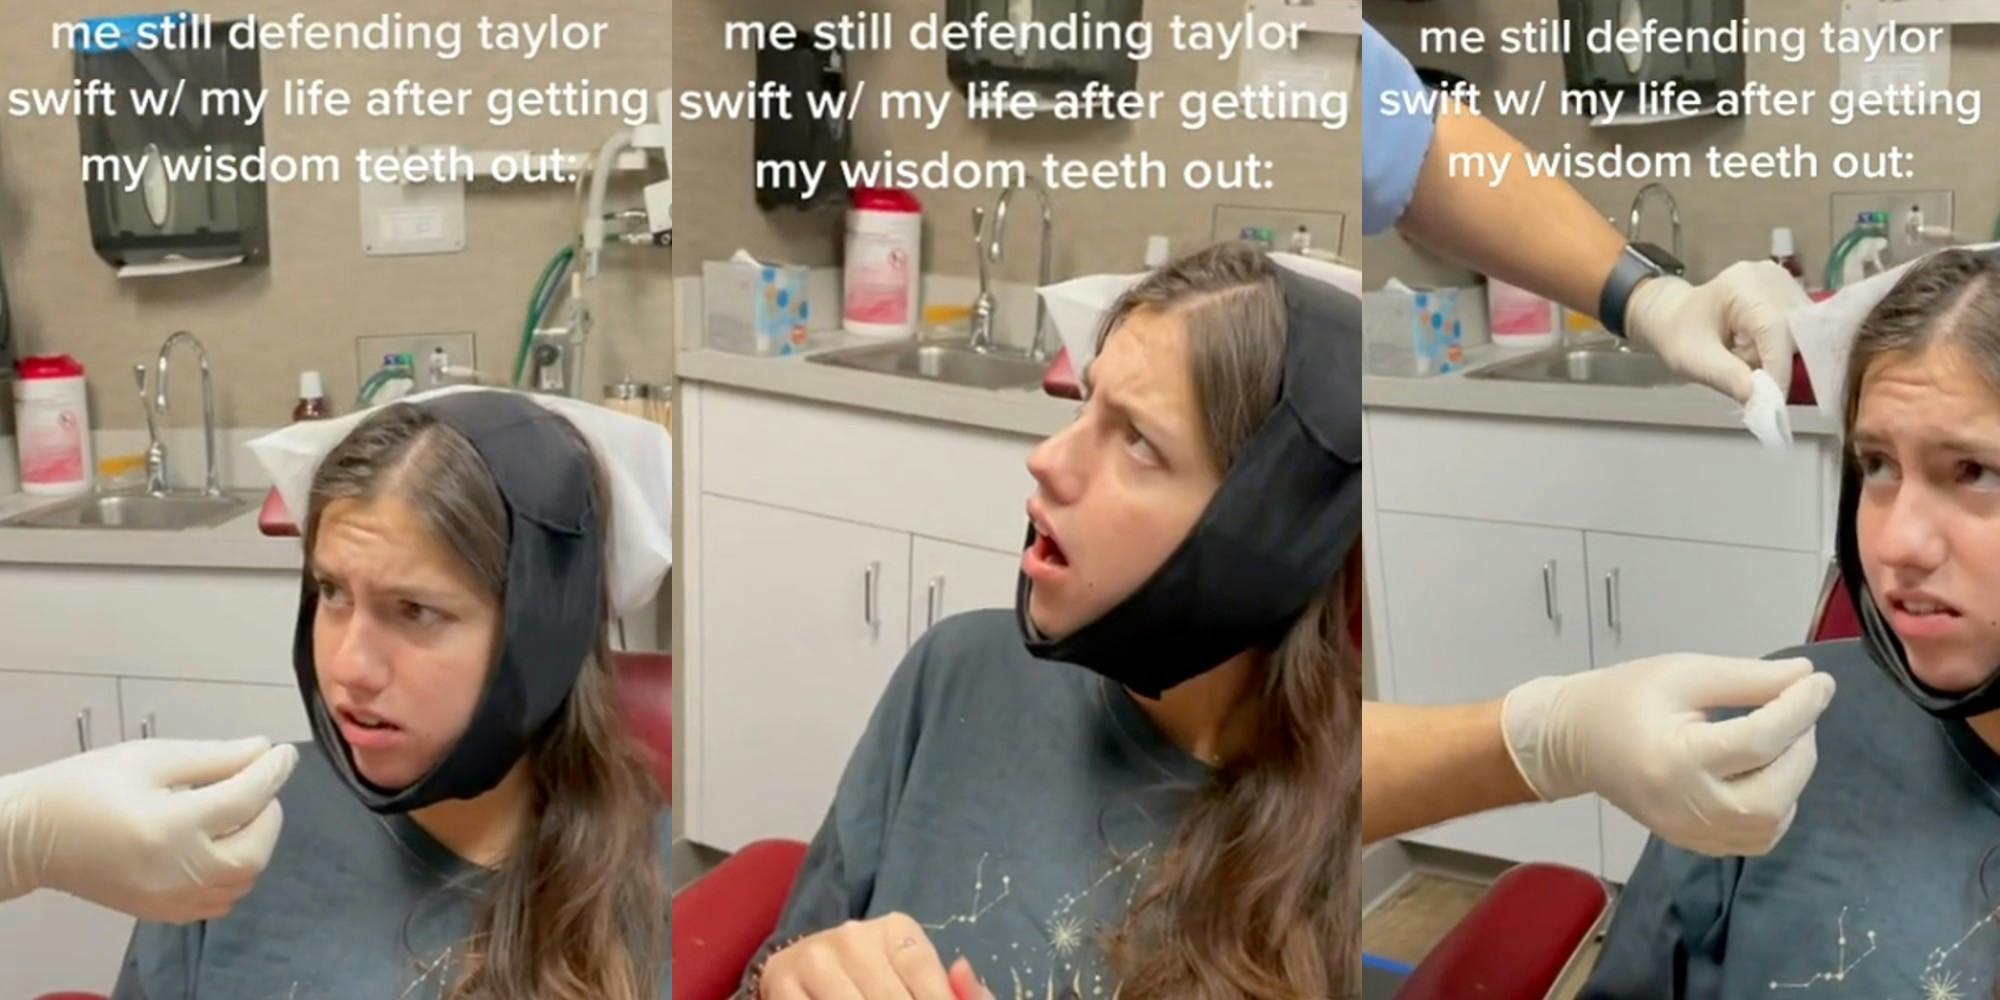 Woman Shocked Over Doctor’s Dislike Of Taylor Swift Post-Surgery